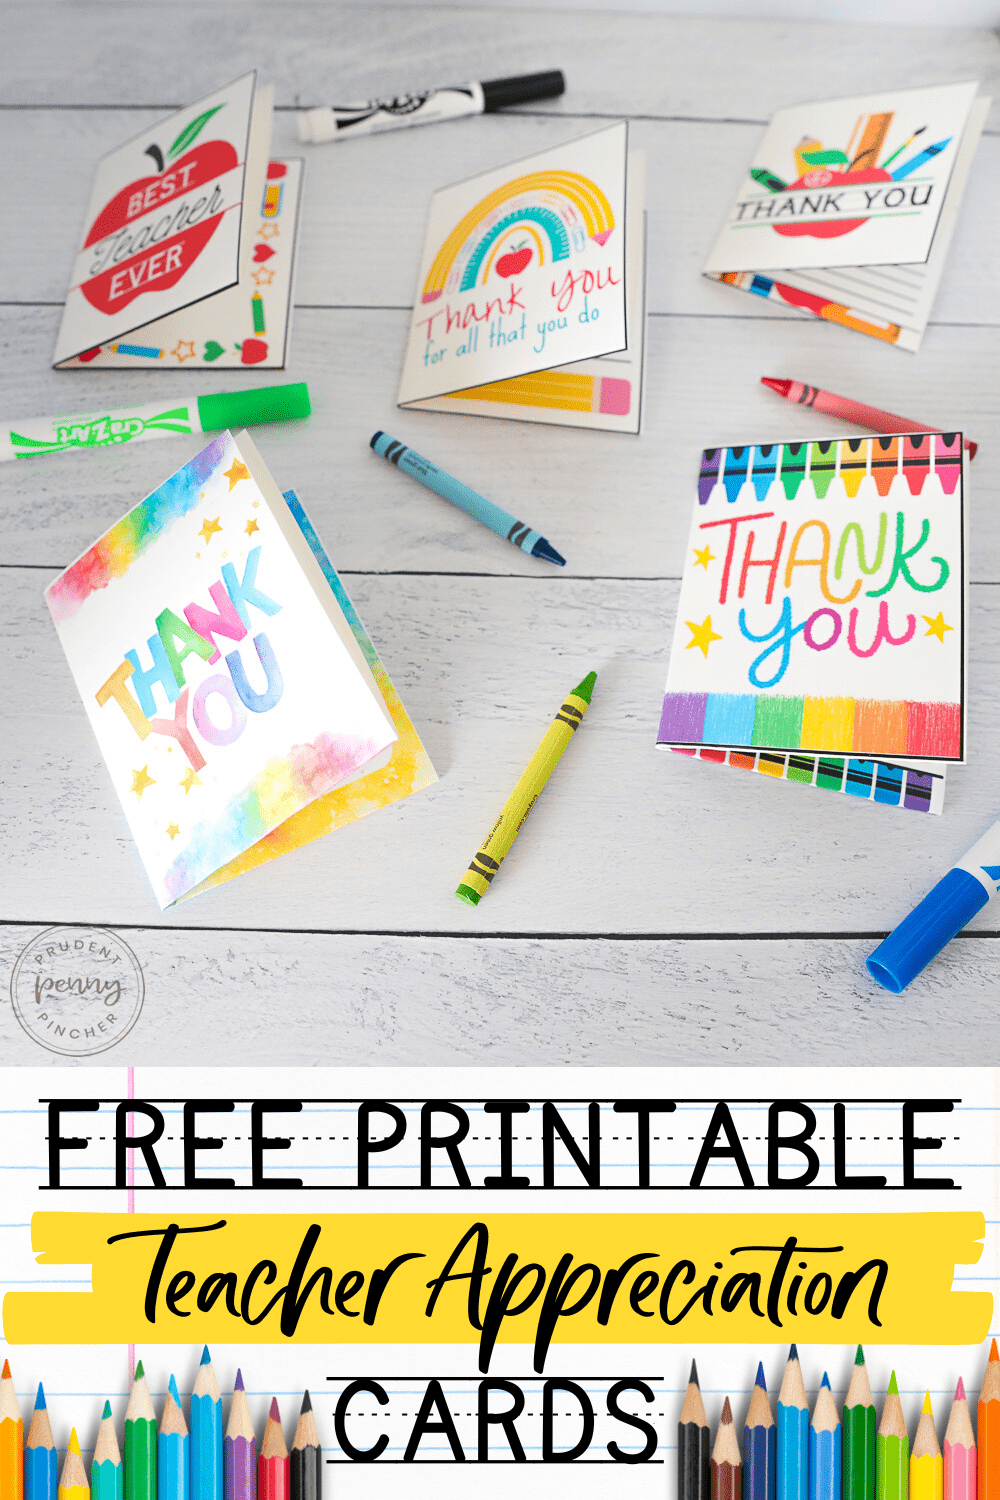 25 Awesome Teacher Appreciation Cards With Free Printables!, 46% OFF